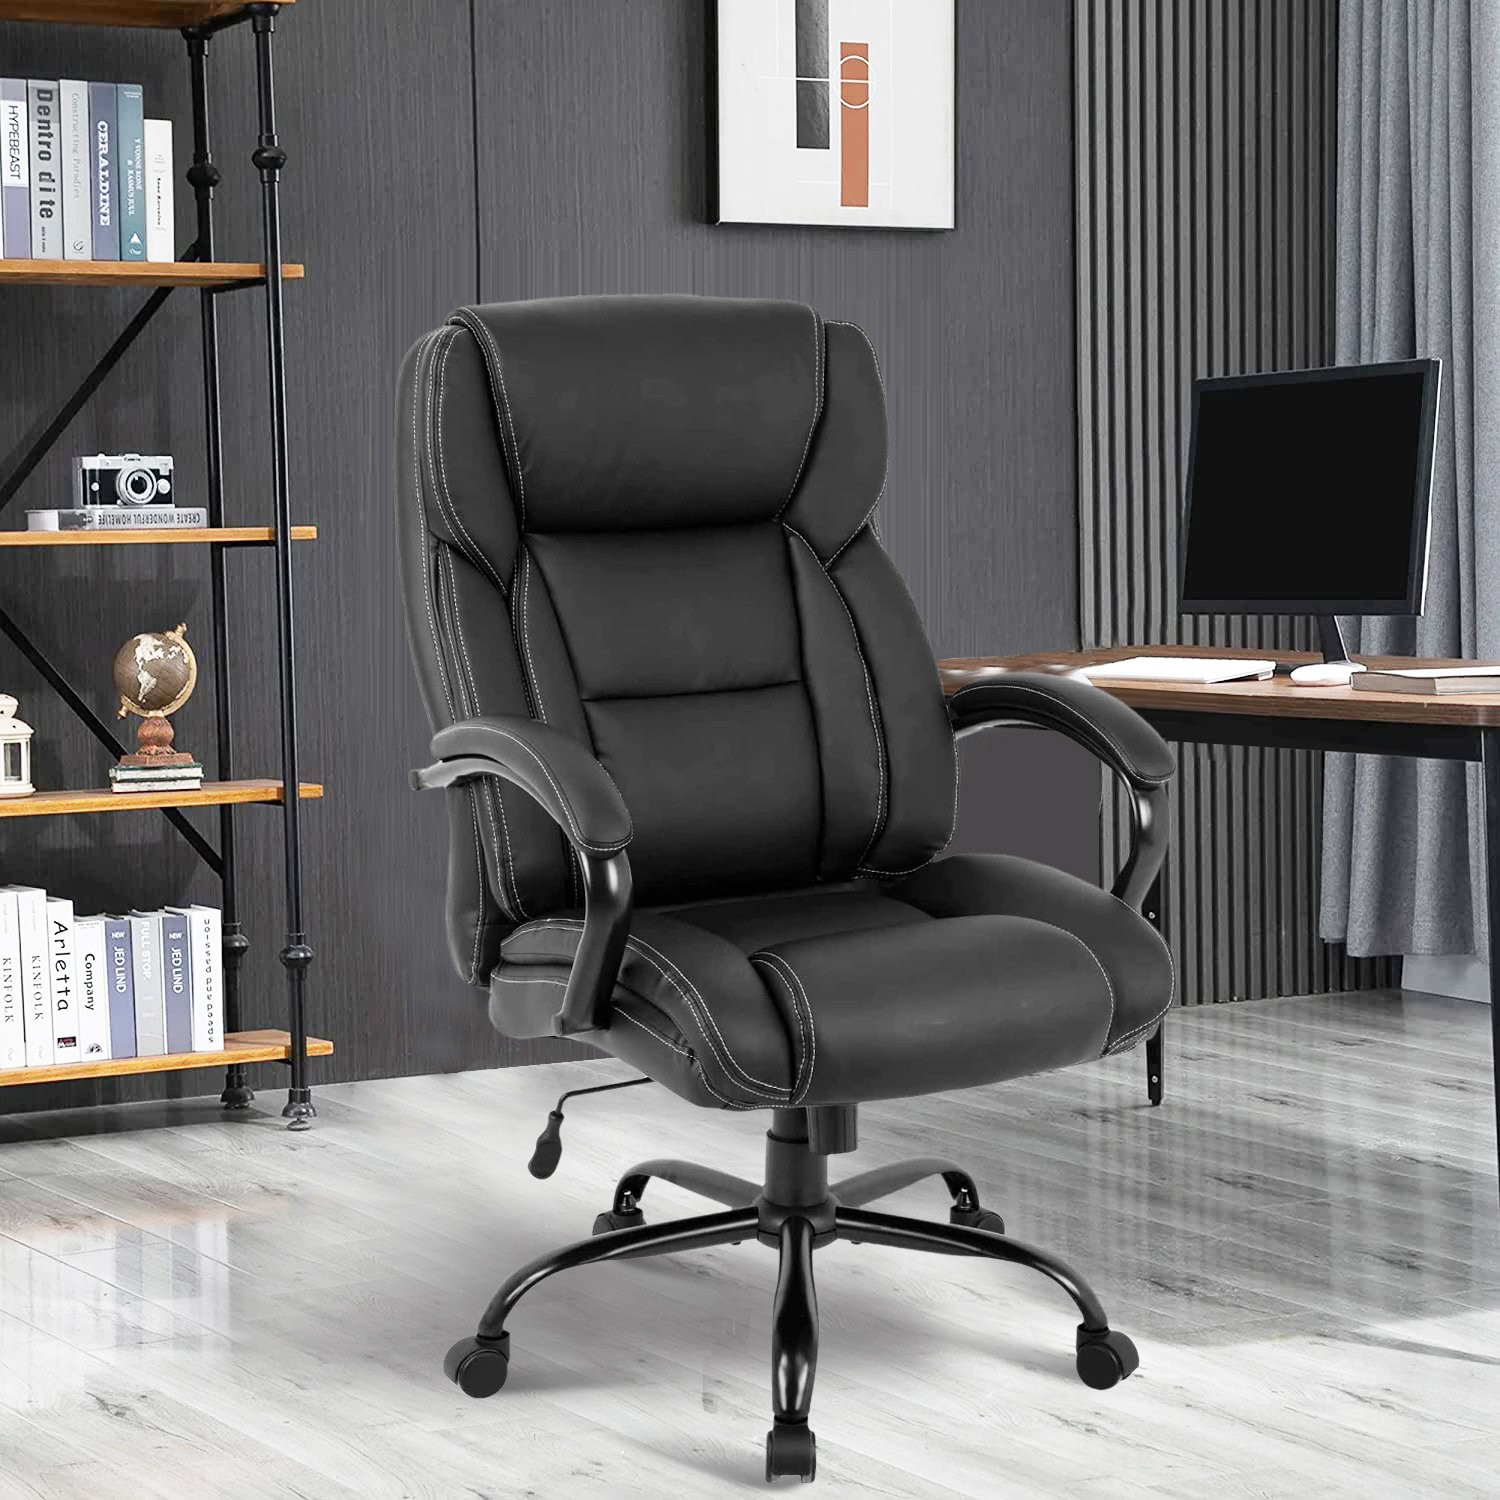 Halifax North America 500lbs Big and Tall 43.75 High Office Chair with Wide Seat | Mathis Home